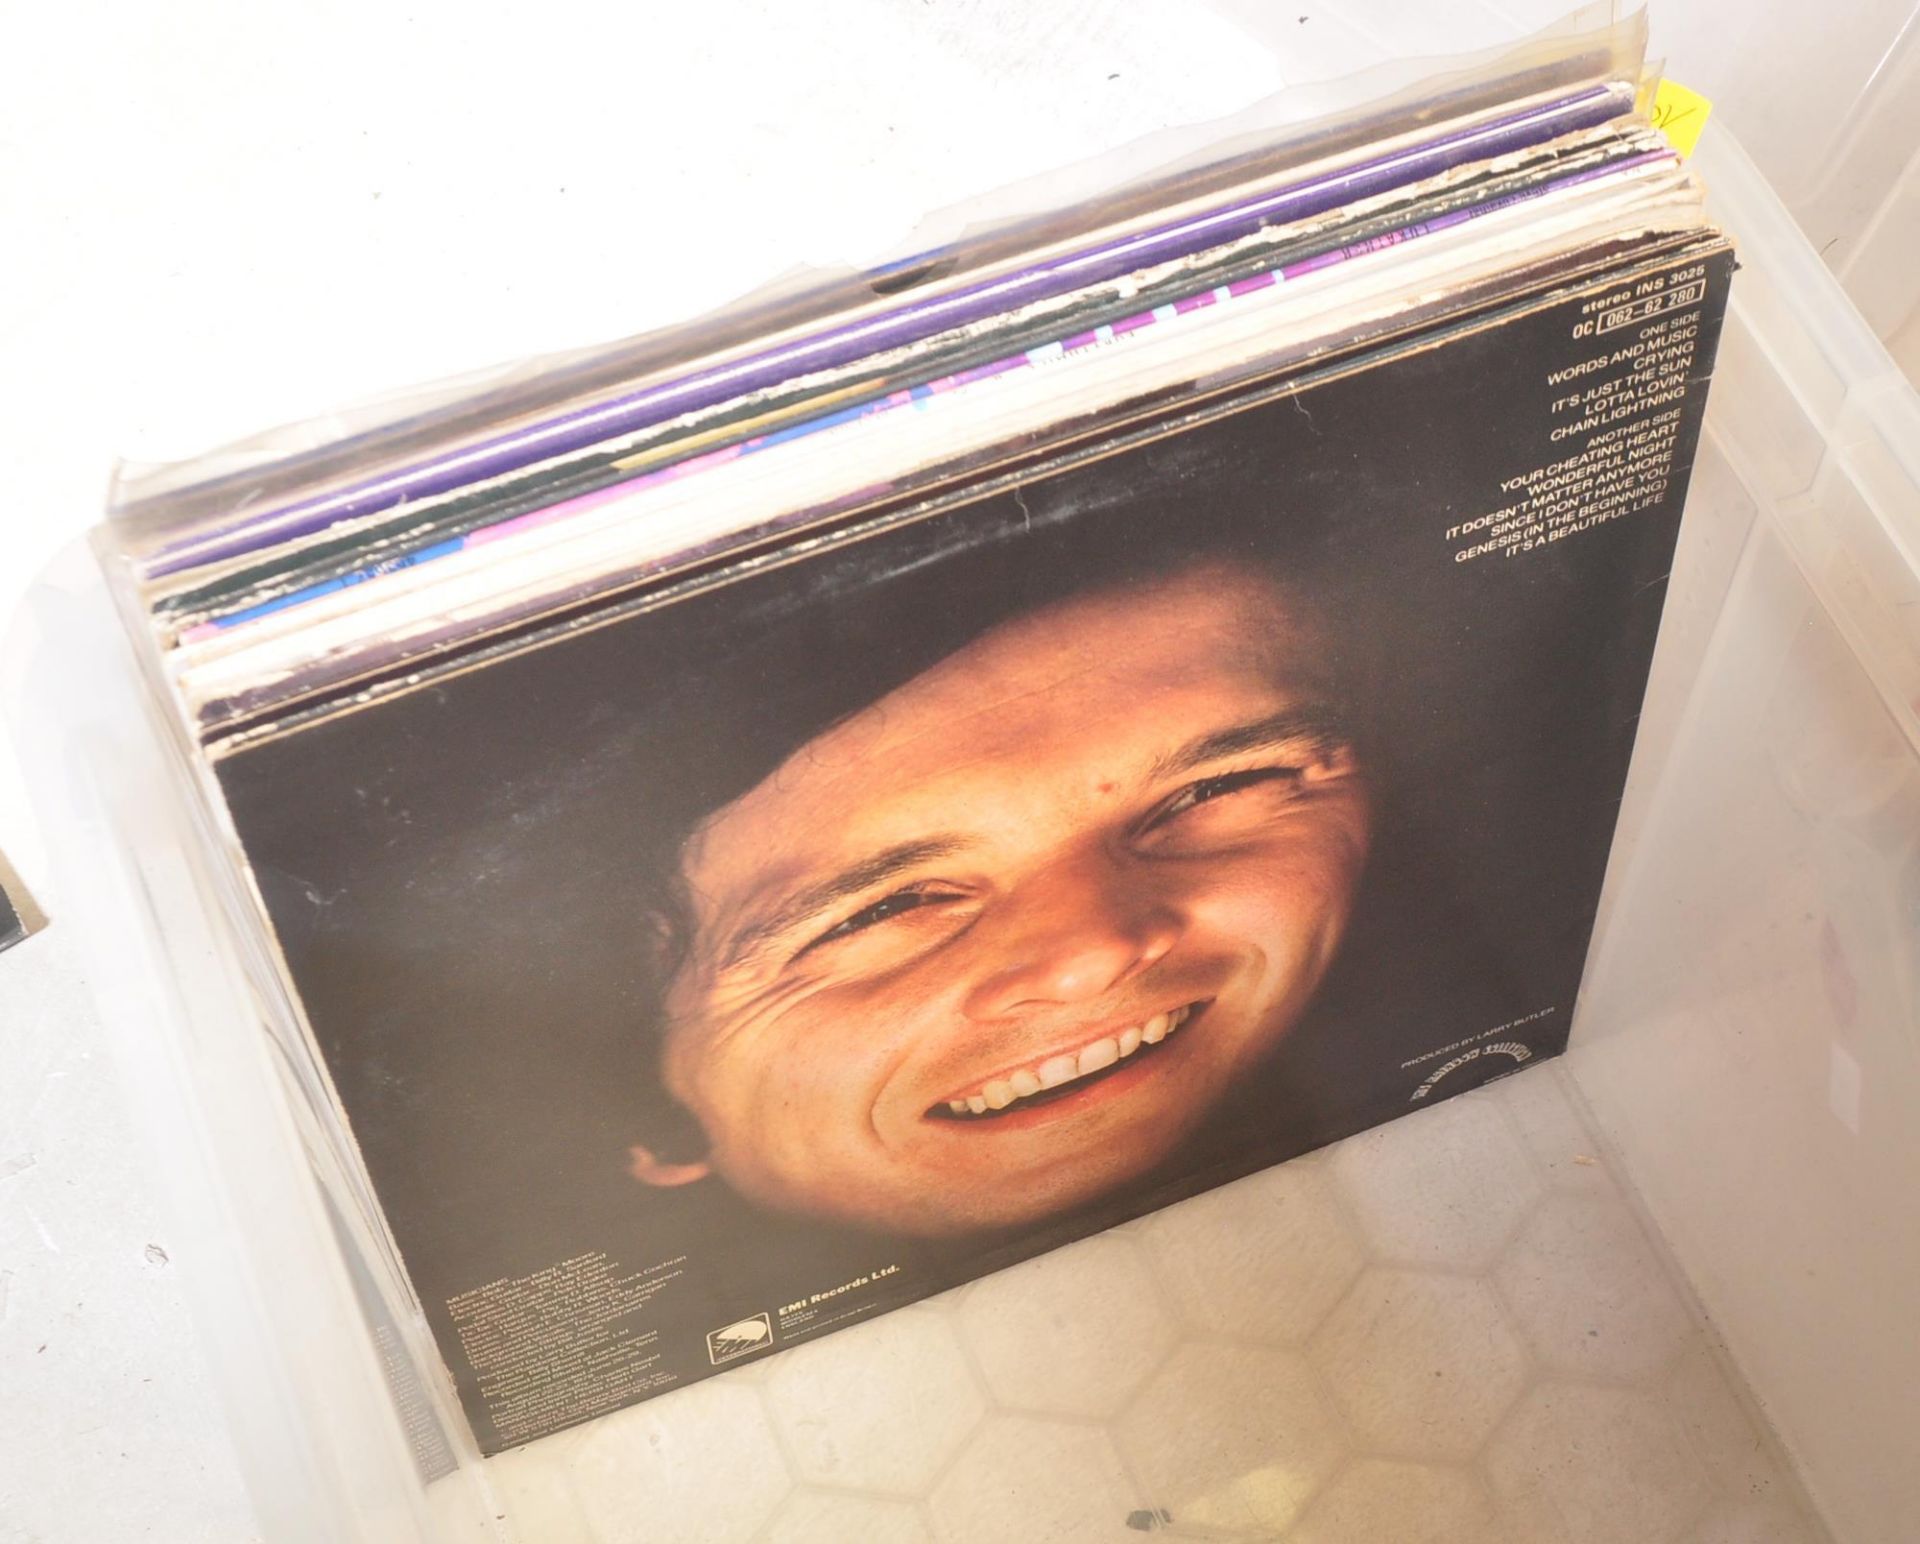 LARGE COLLECTION OF VINTAGE LP VINYL RECORDS - Image 5 of 5